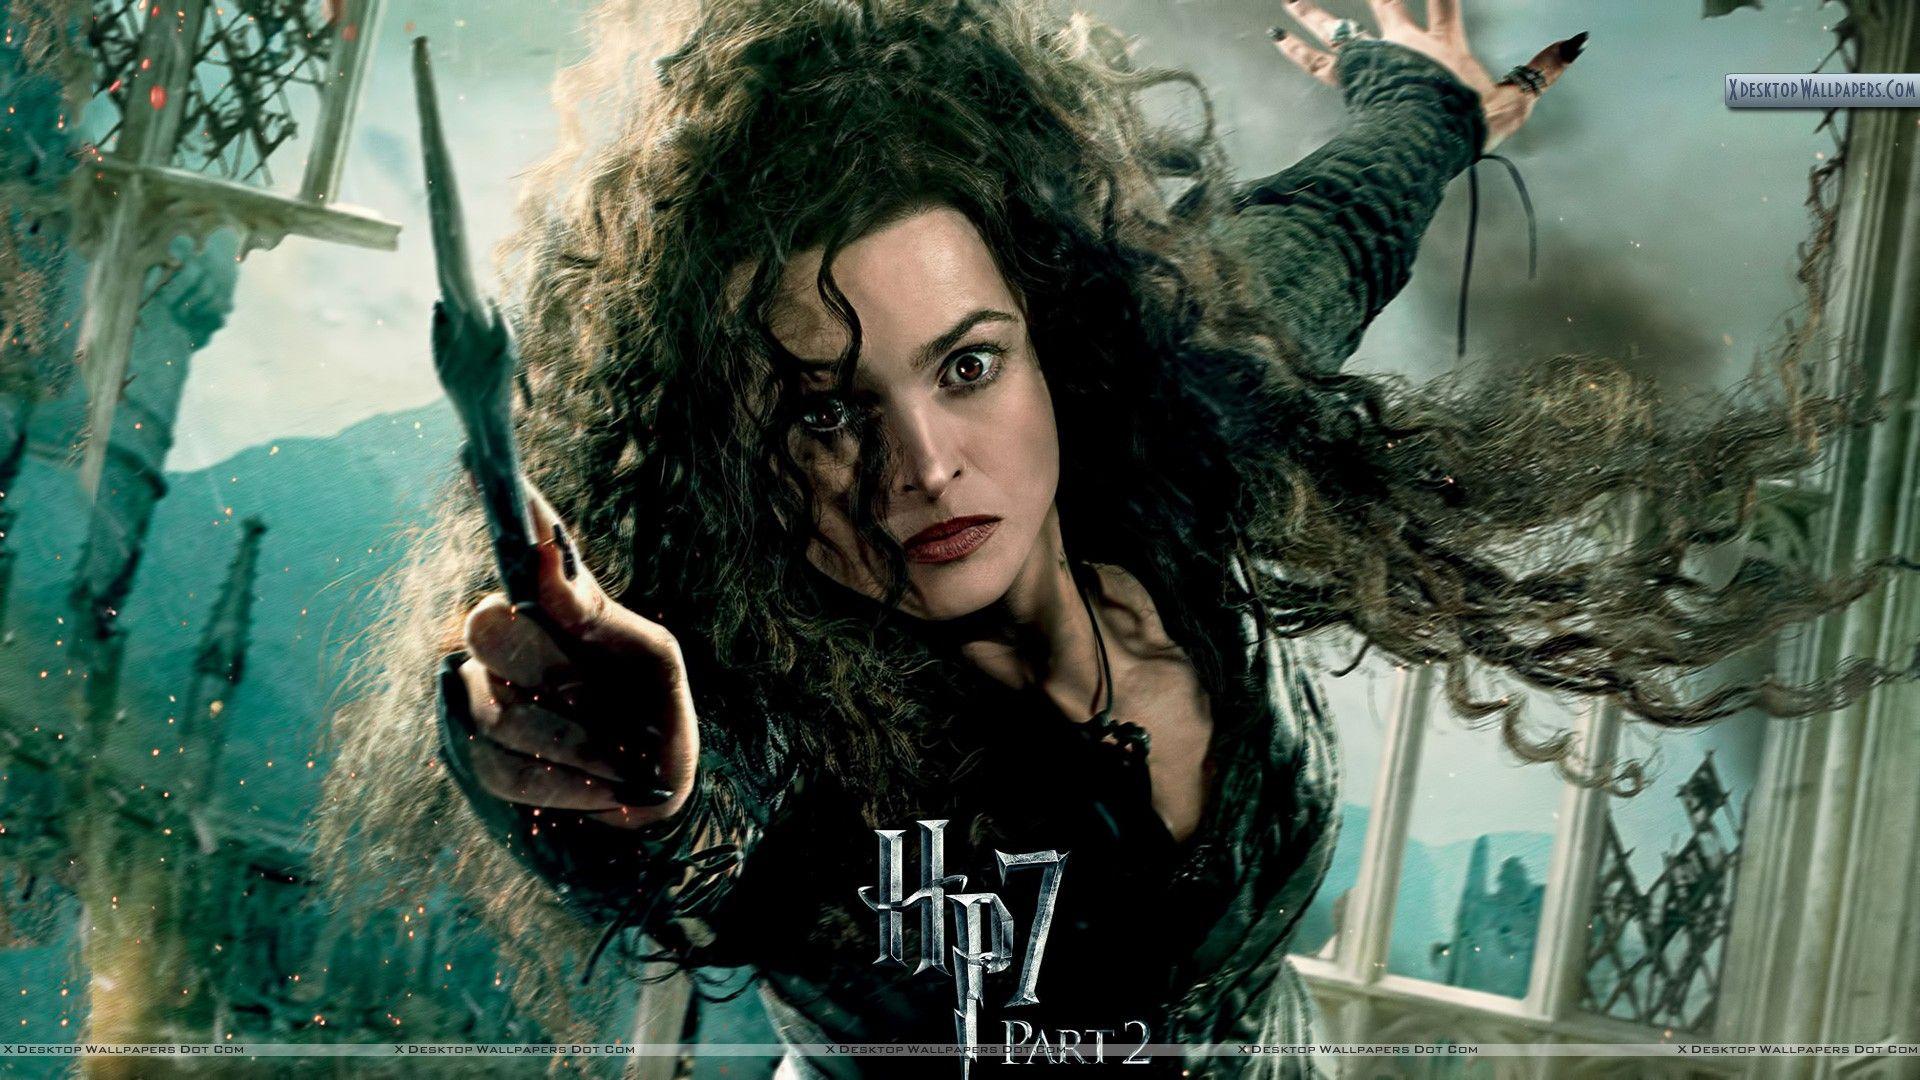 Helena Bonham Carter In Harry Potter And The Deathly Hallows Part 2